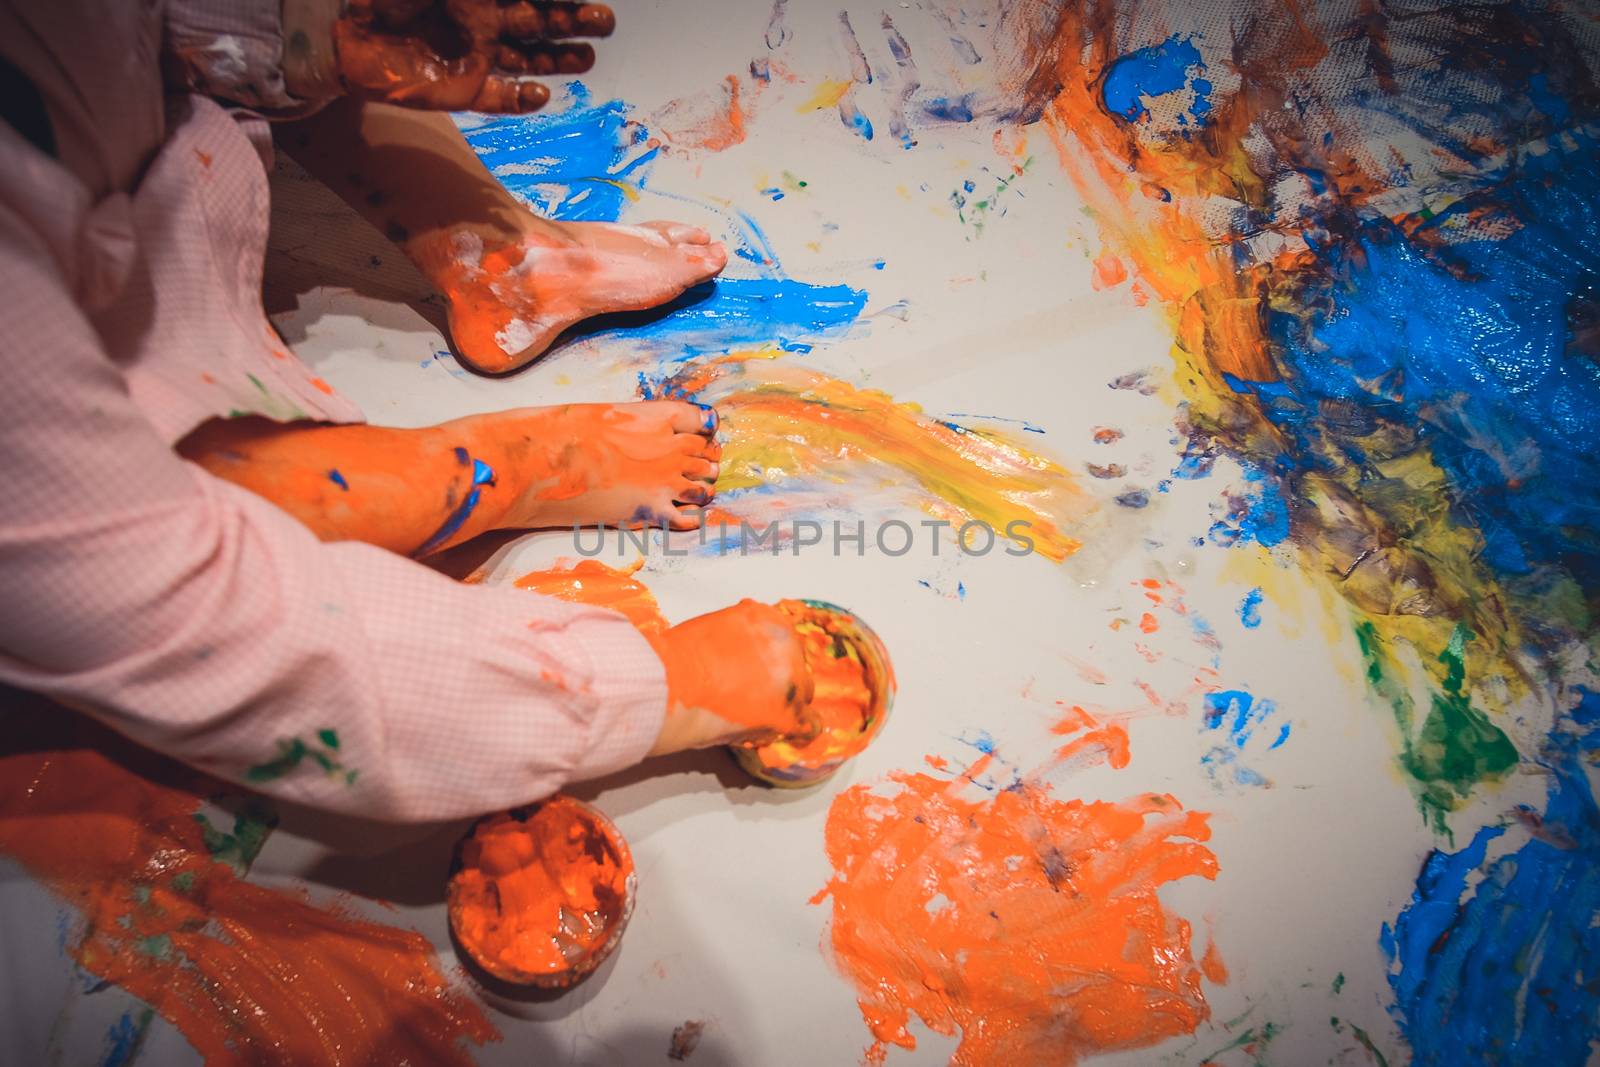 Kid painting a big paper with hos or her hands and barefoot in multiple colors